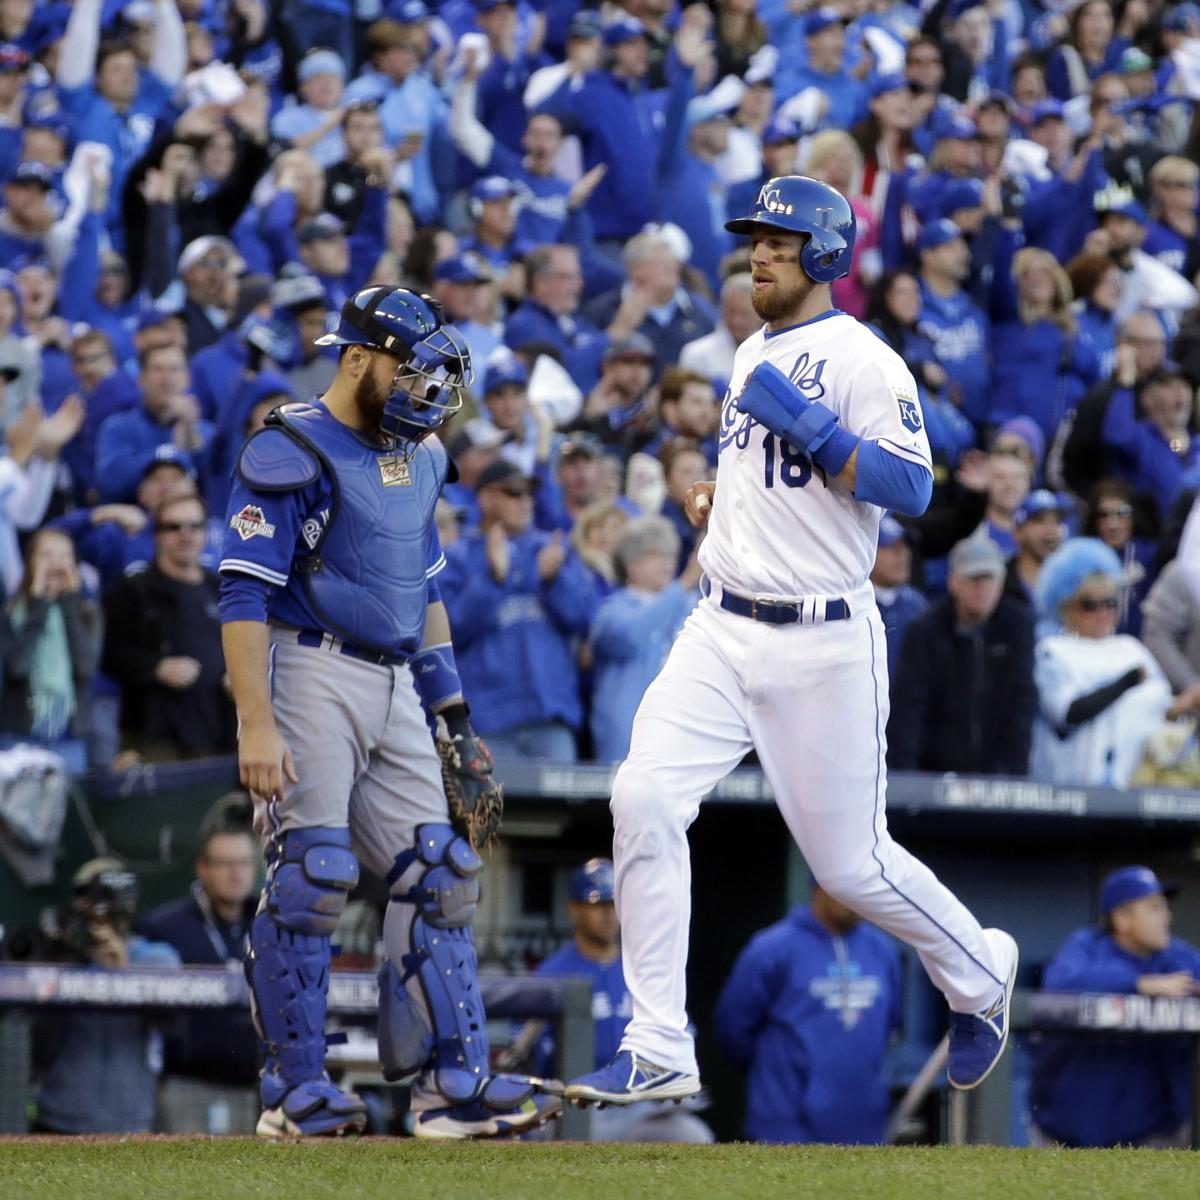 Blue Jays vs. Royals Game 2 Live ALCS Score and Highlights News